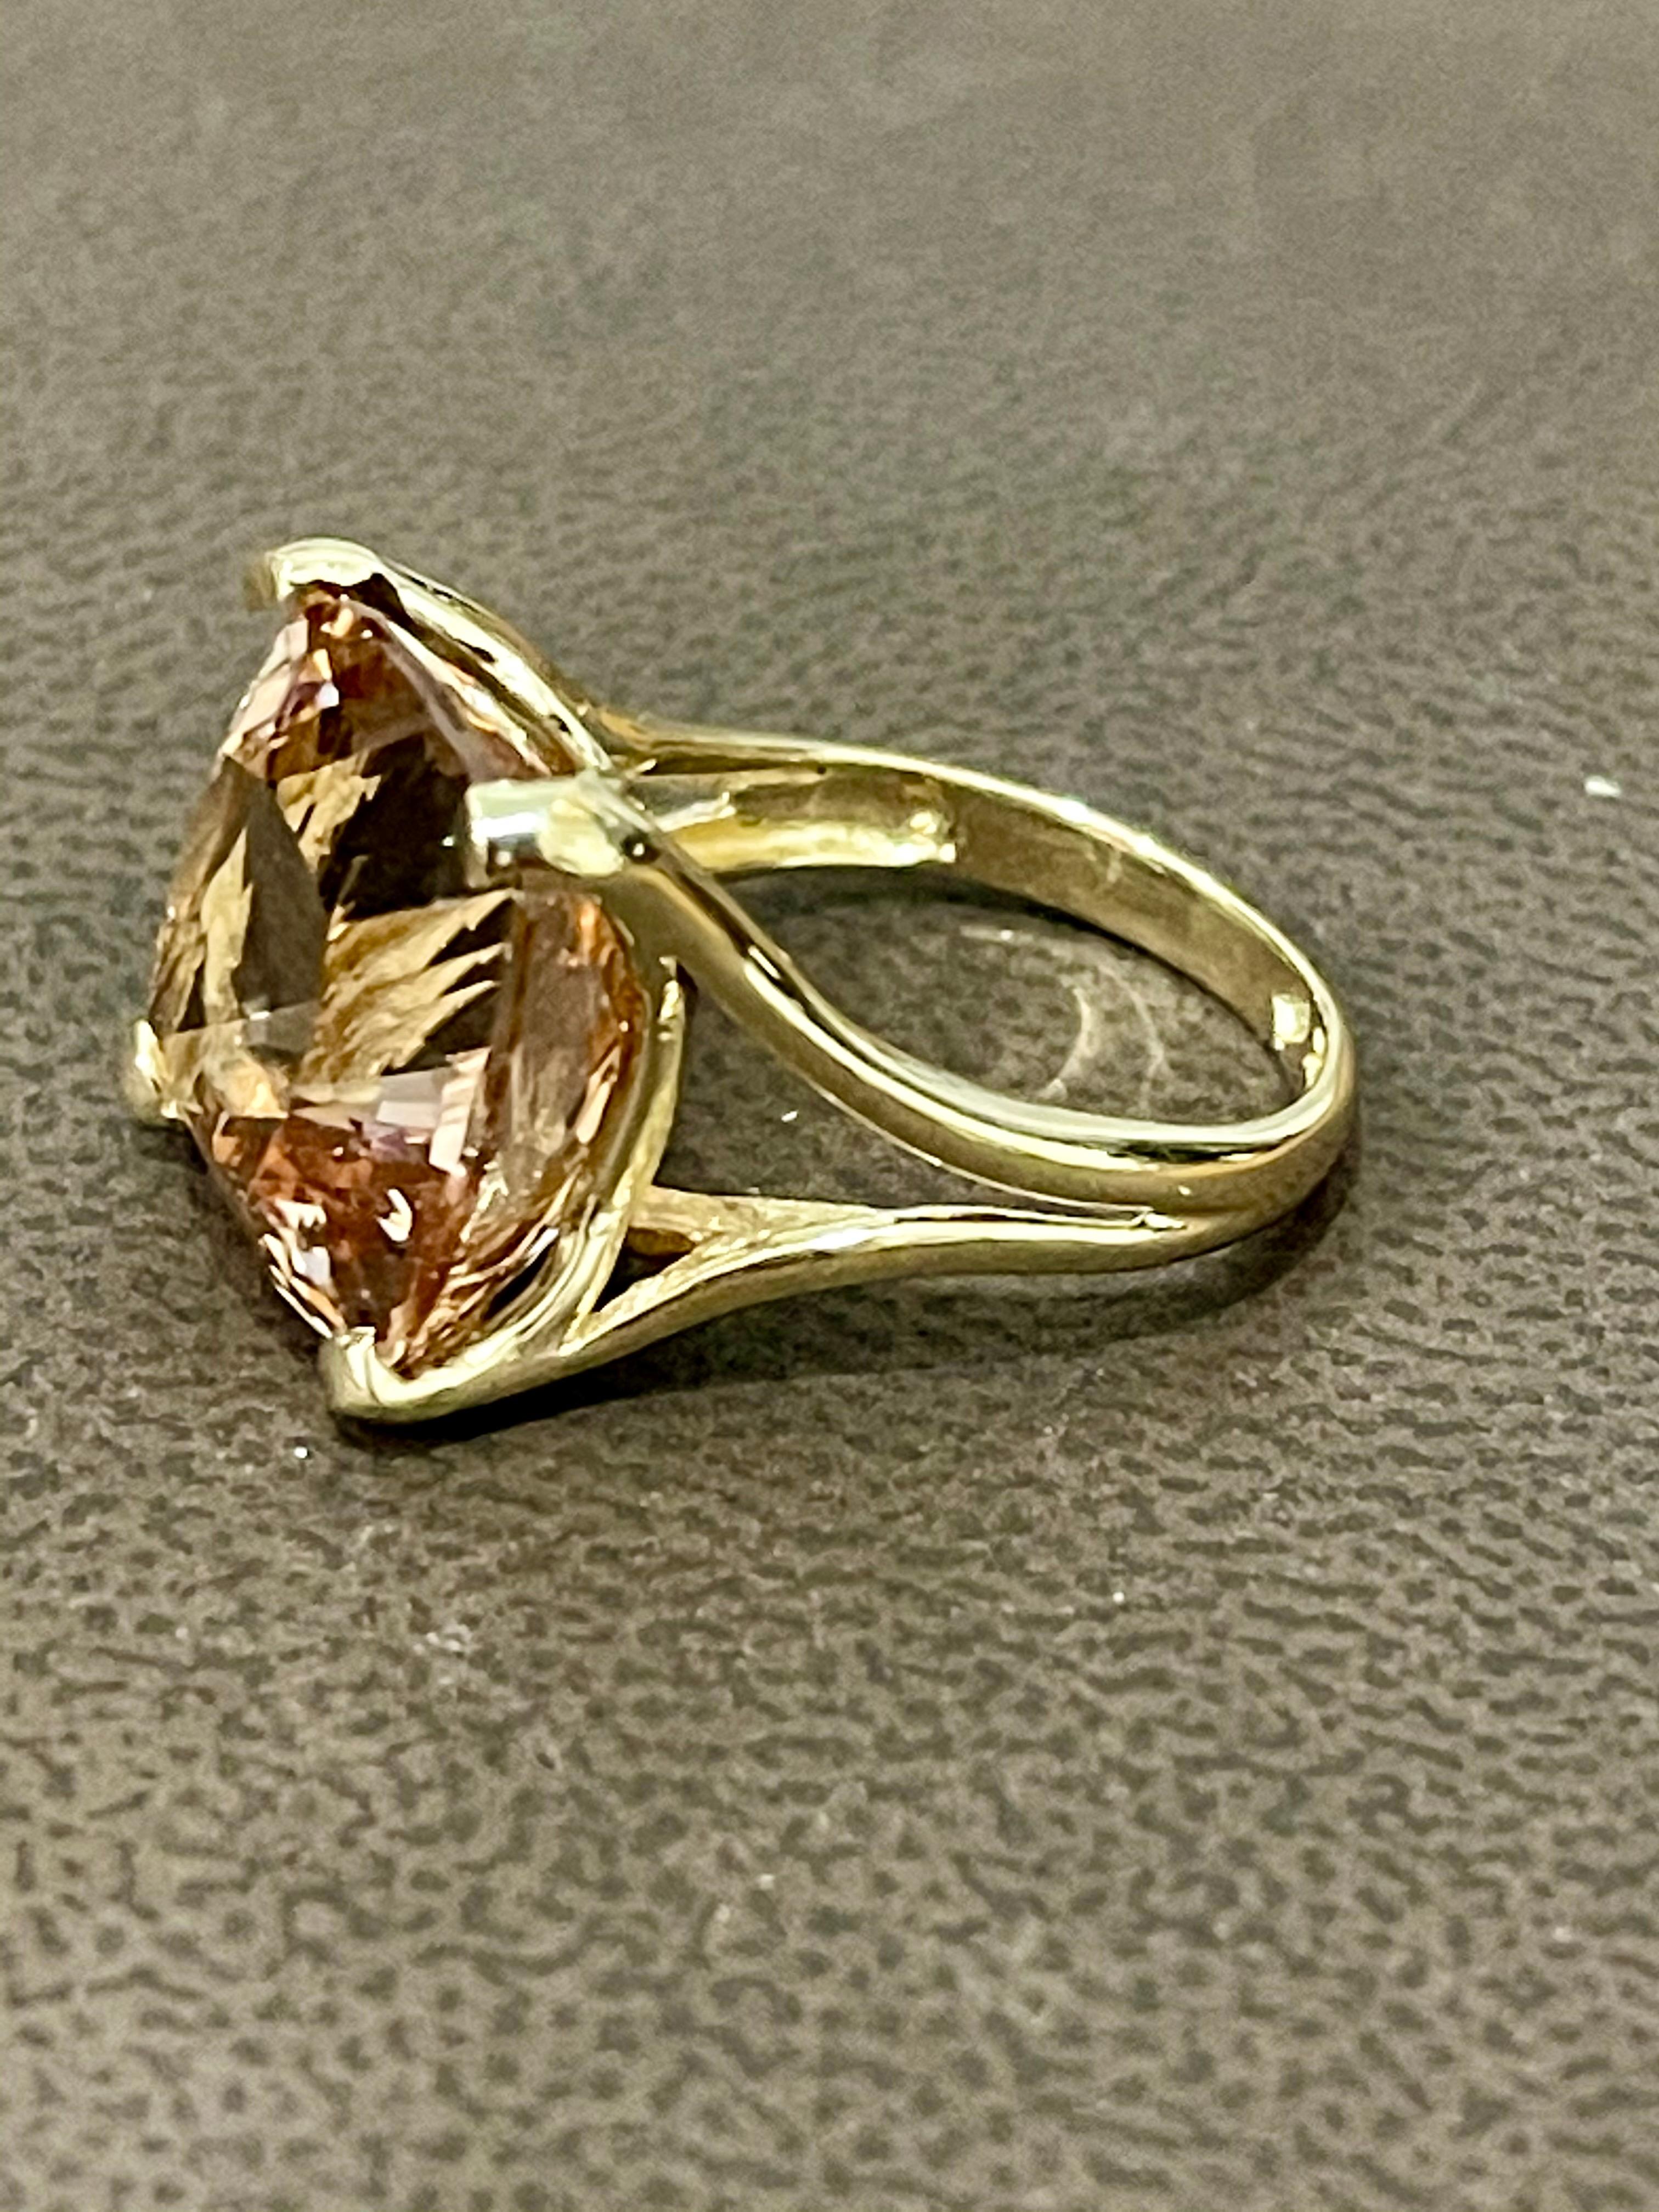 16 Carat Cushion Shape Morganite Cocktail Ring 14 Karat Yellow Gold Estate In Excellent Condition For Sale In New York, NY